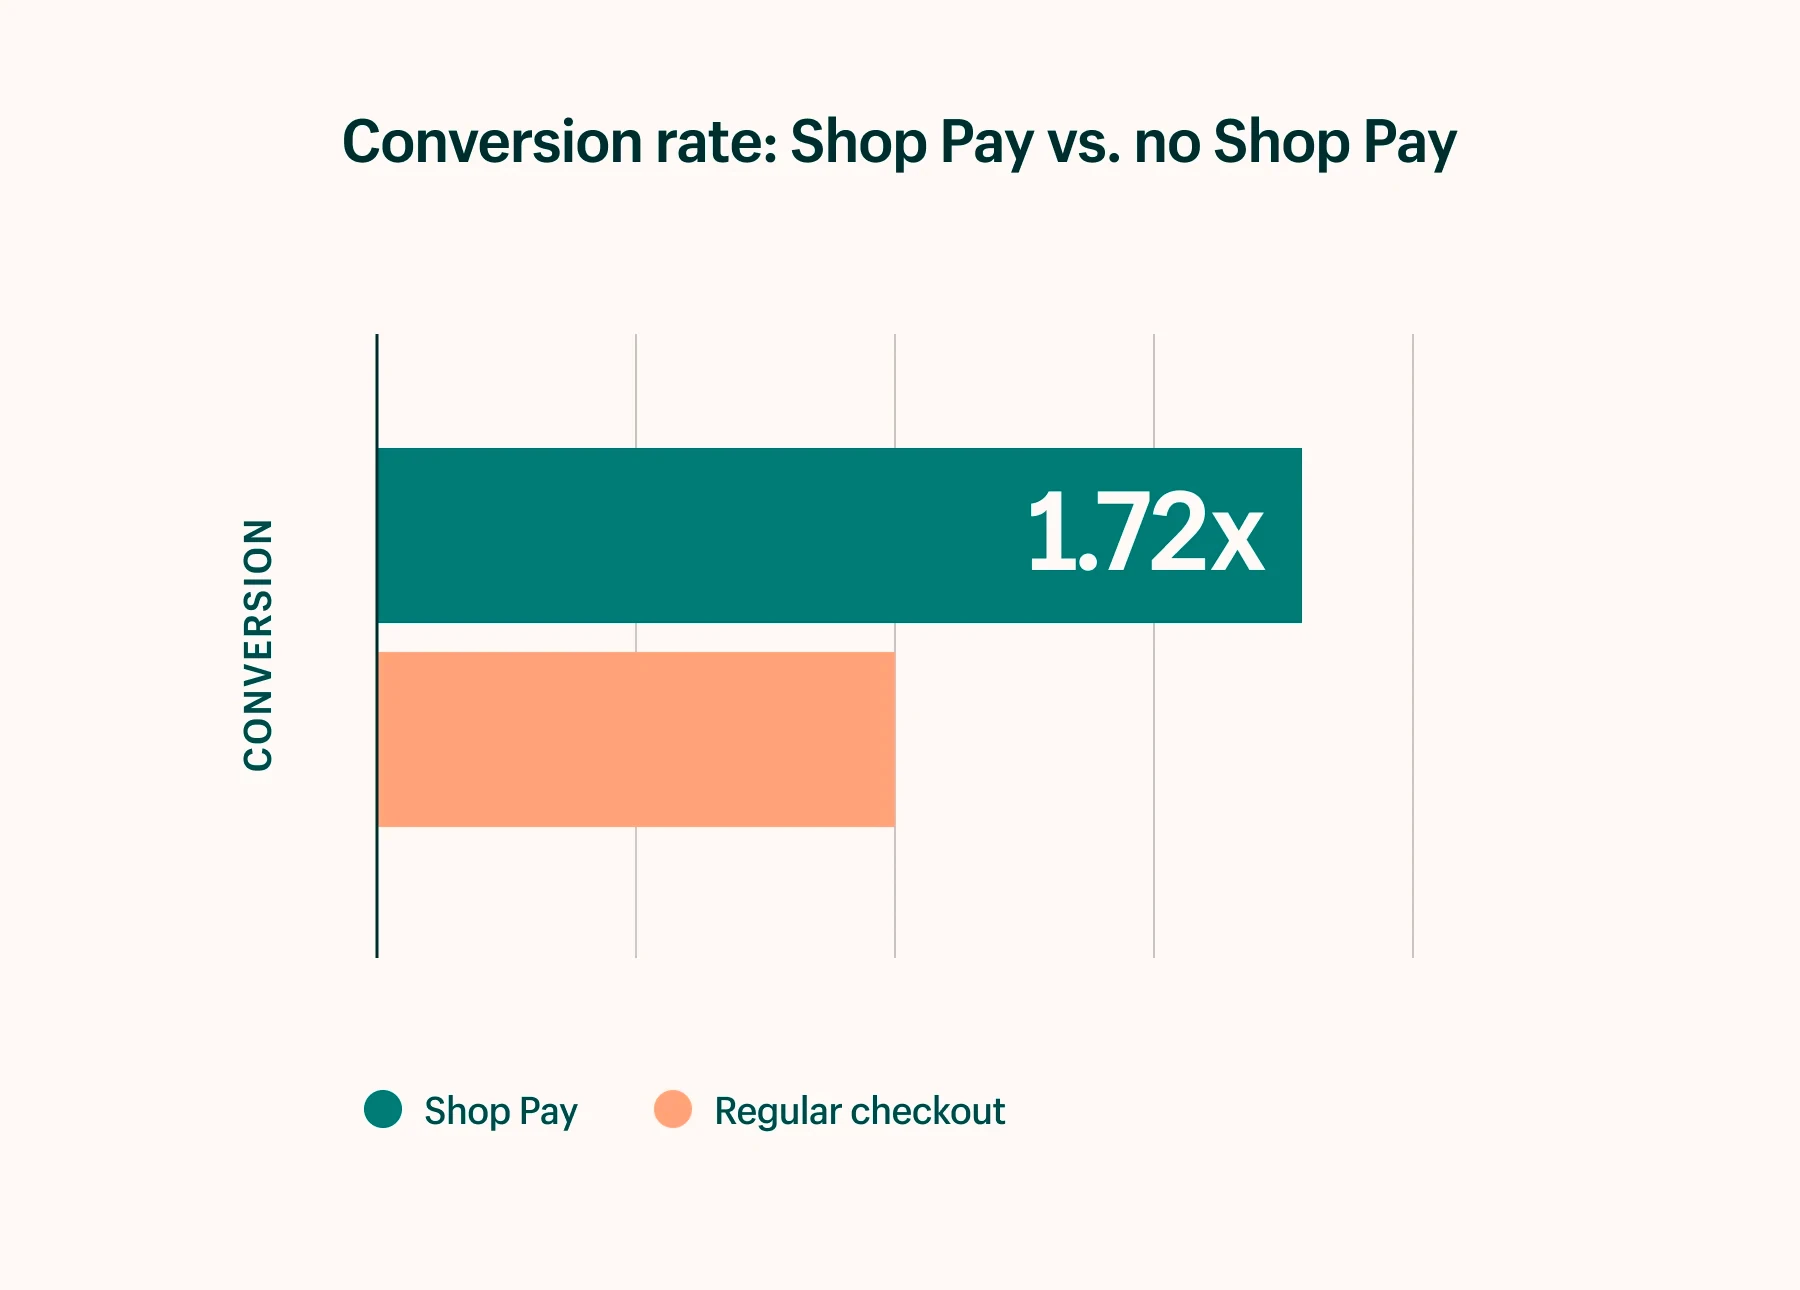 Chart showing conversion rate of Shop Pay vs other checkouts